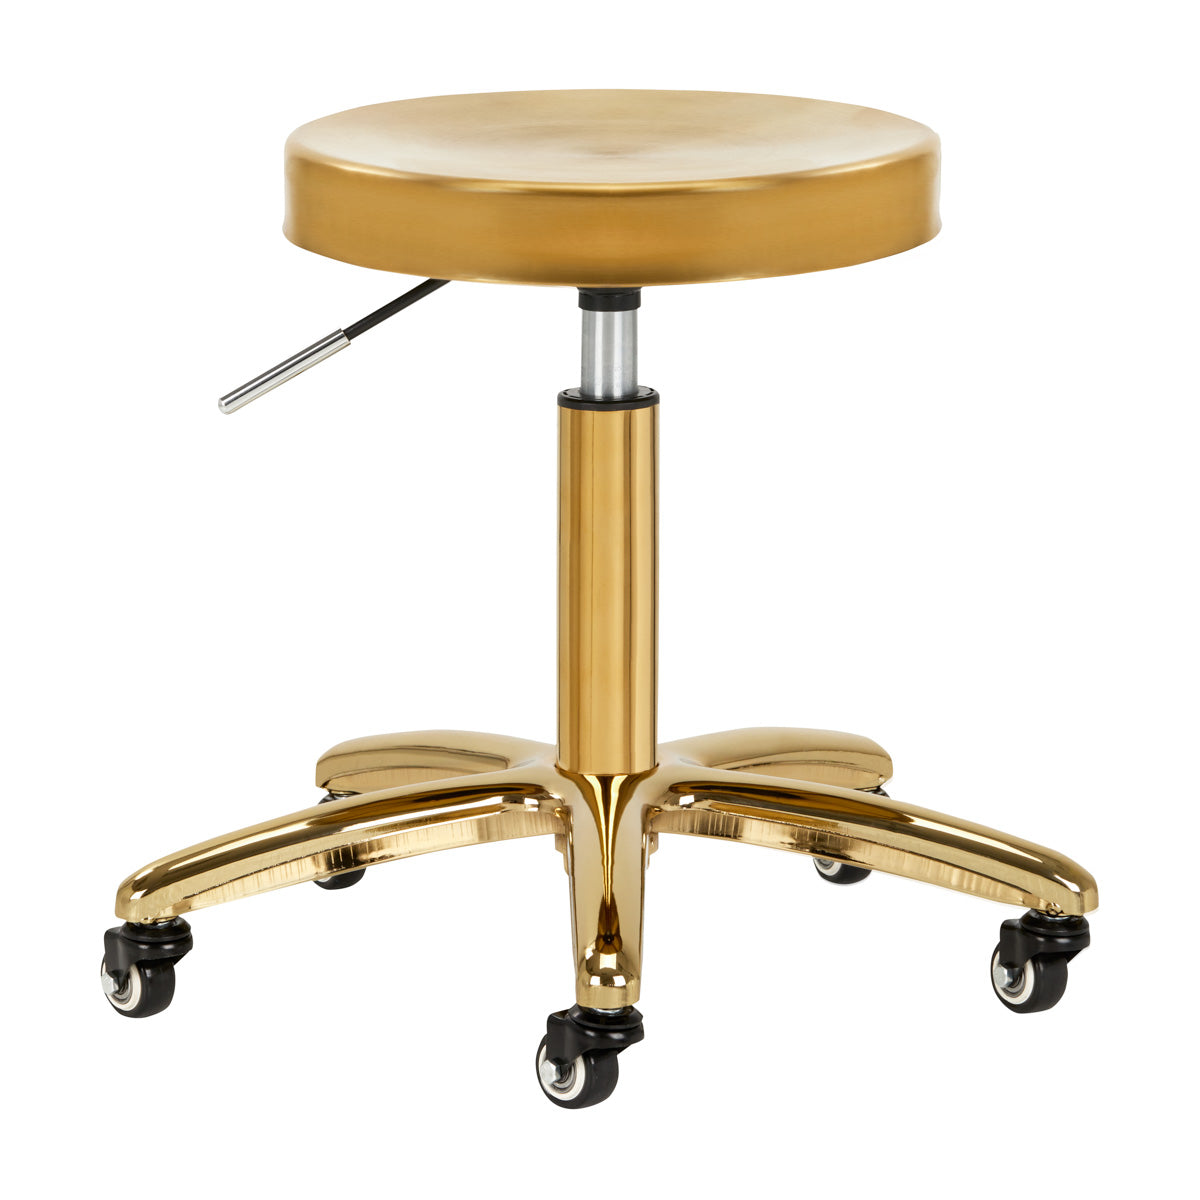 ACTIVESHOP COSMETIC / HAIRDRESSING STOOL GOLDEN AM863